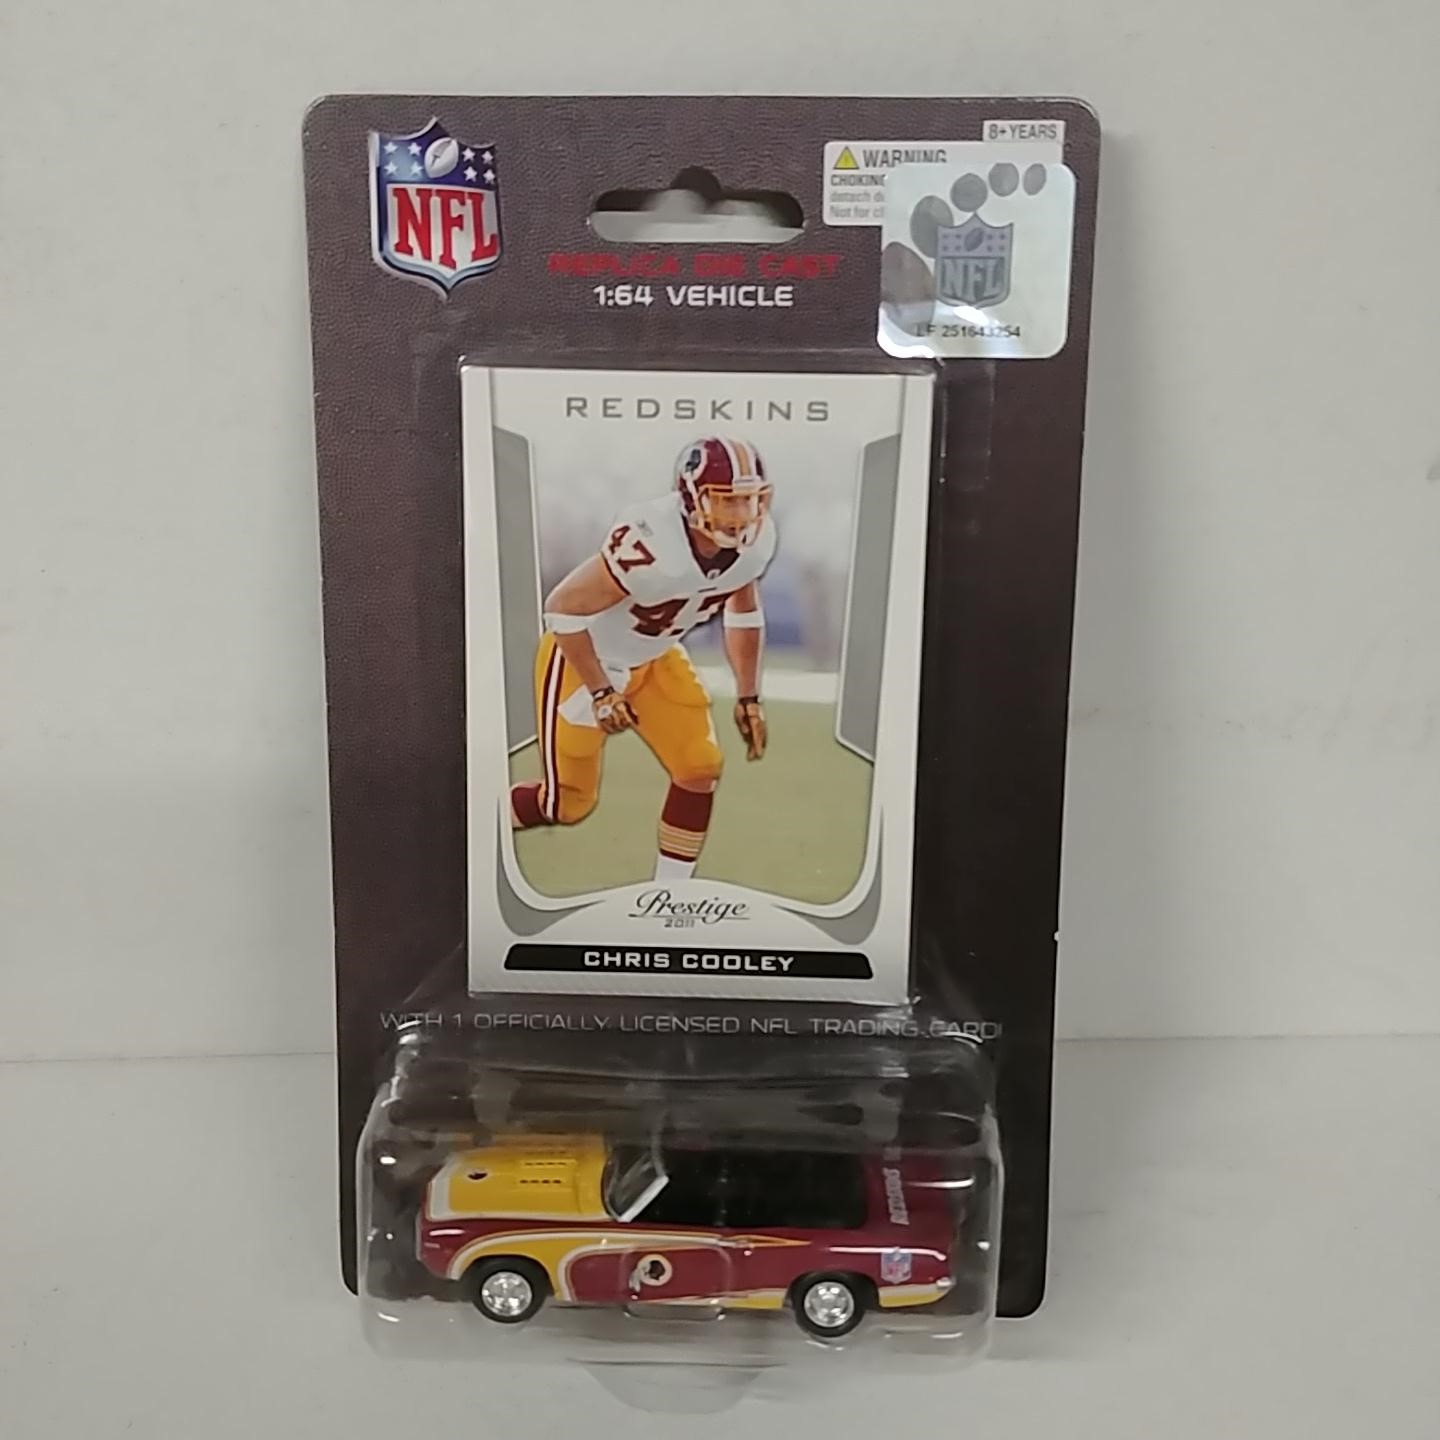 2011 Washington Redskins 1/64th Mustang with Chris Cooley trading card